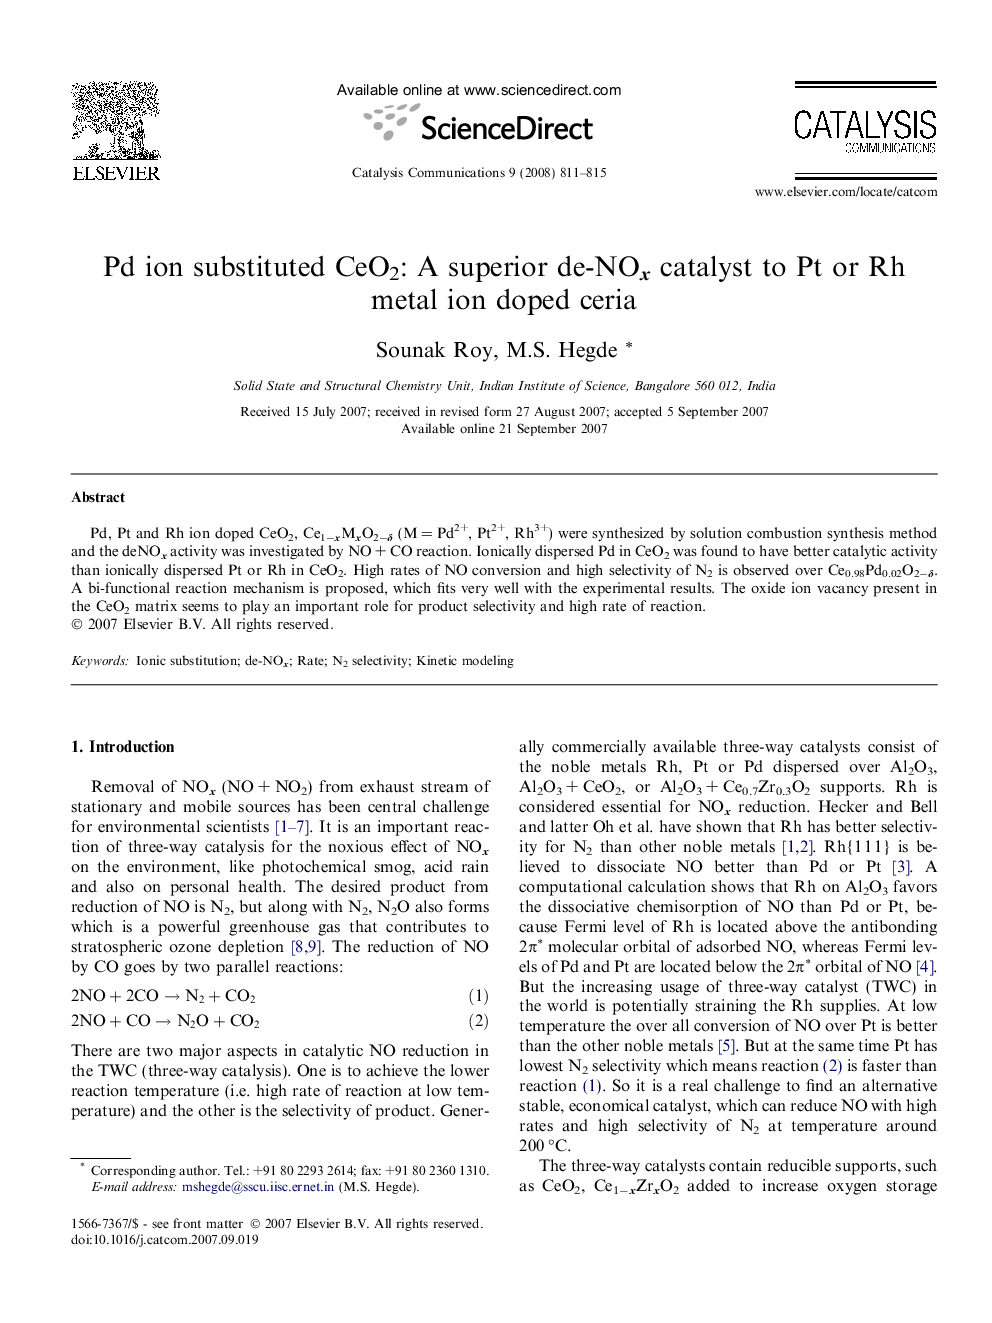 Pd ion substituted CeO2: A superior de-NOx catalyst to Pt or Rh metal ion doped ceria